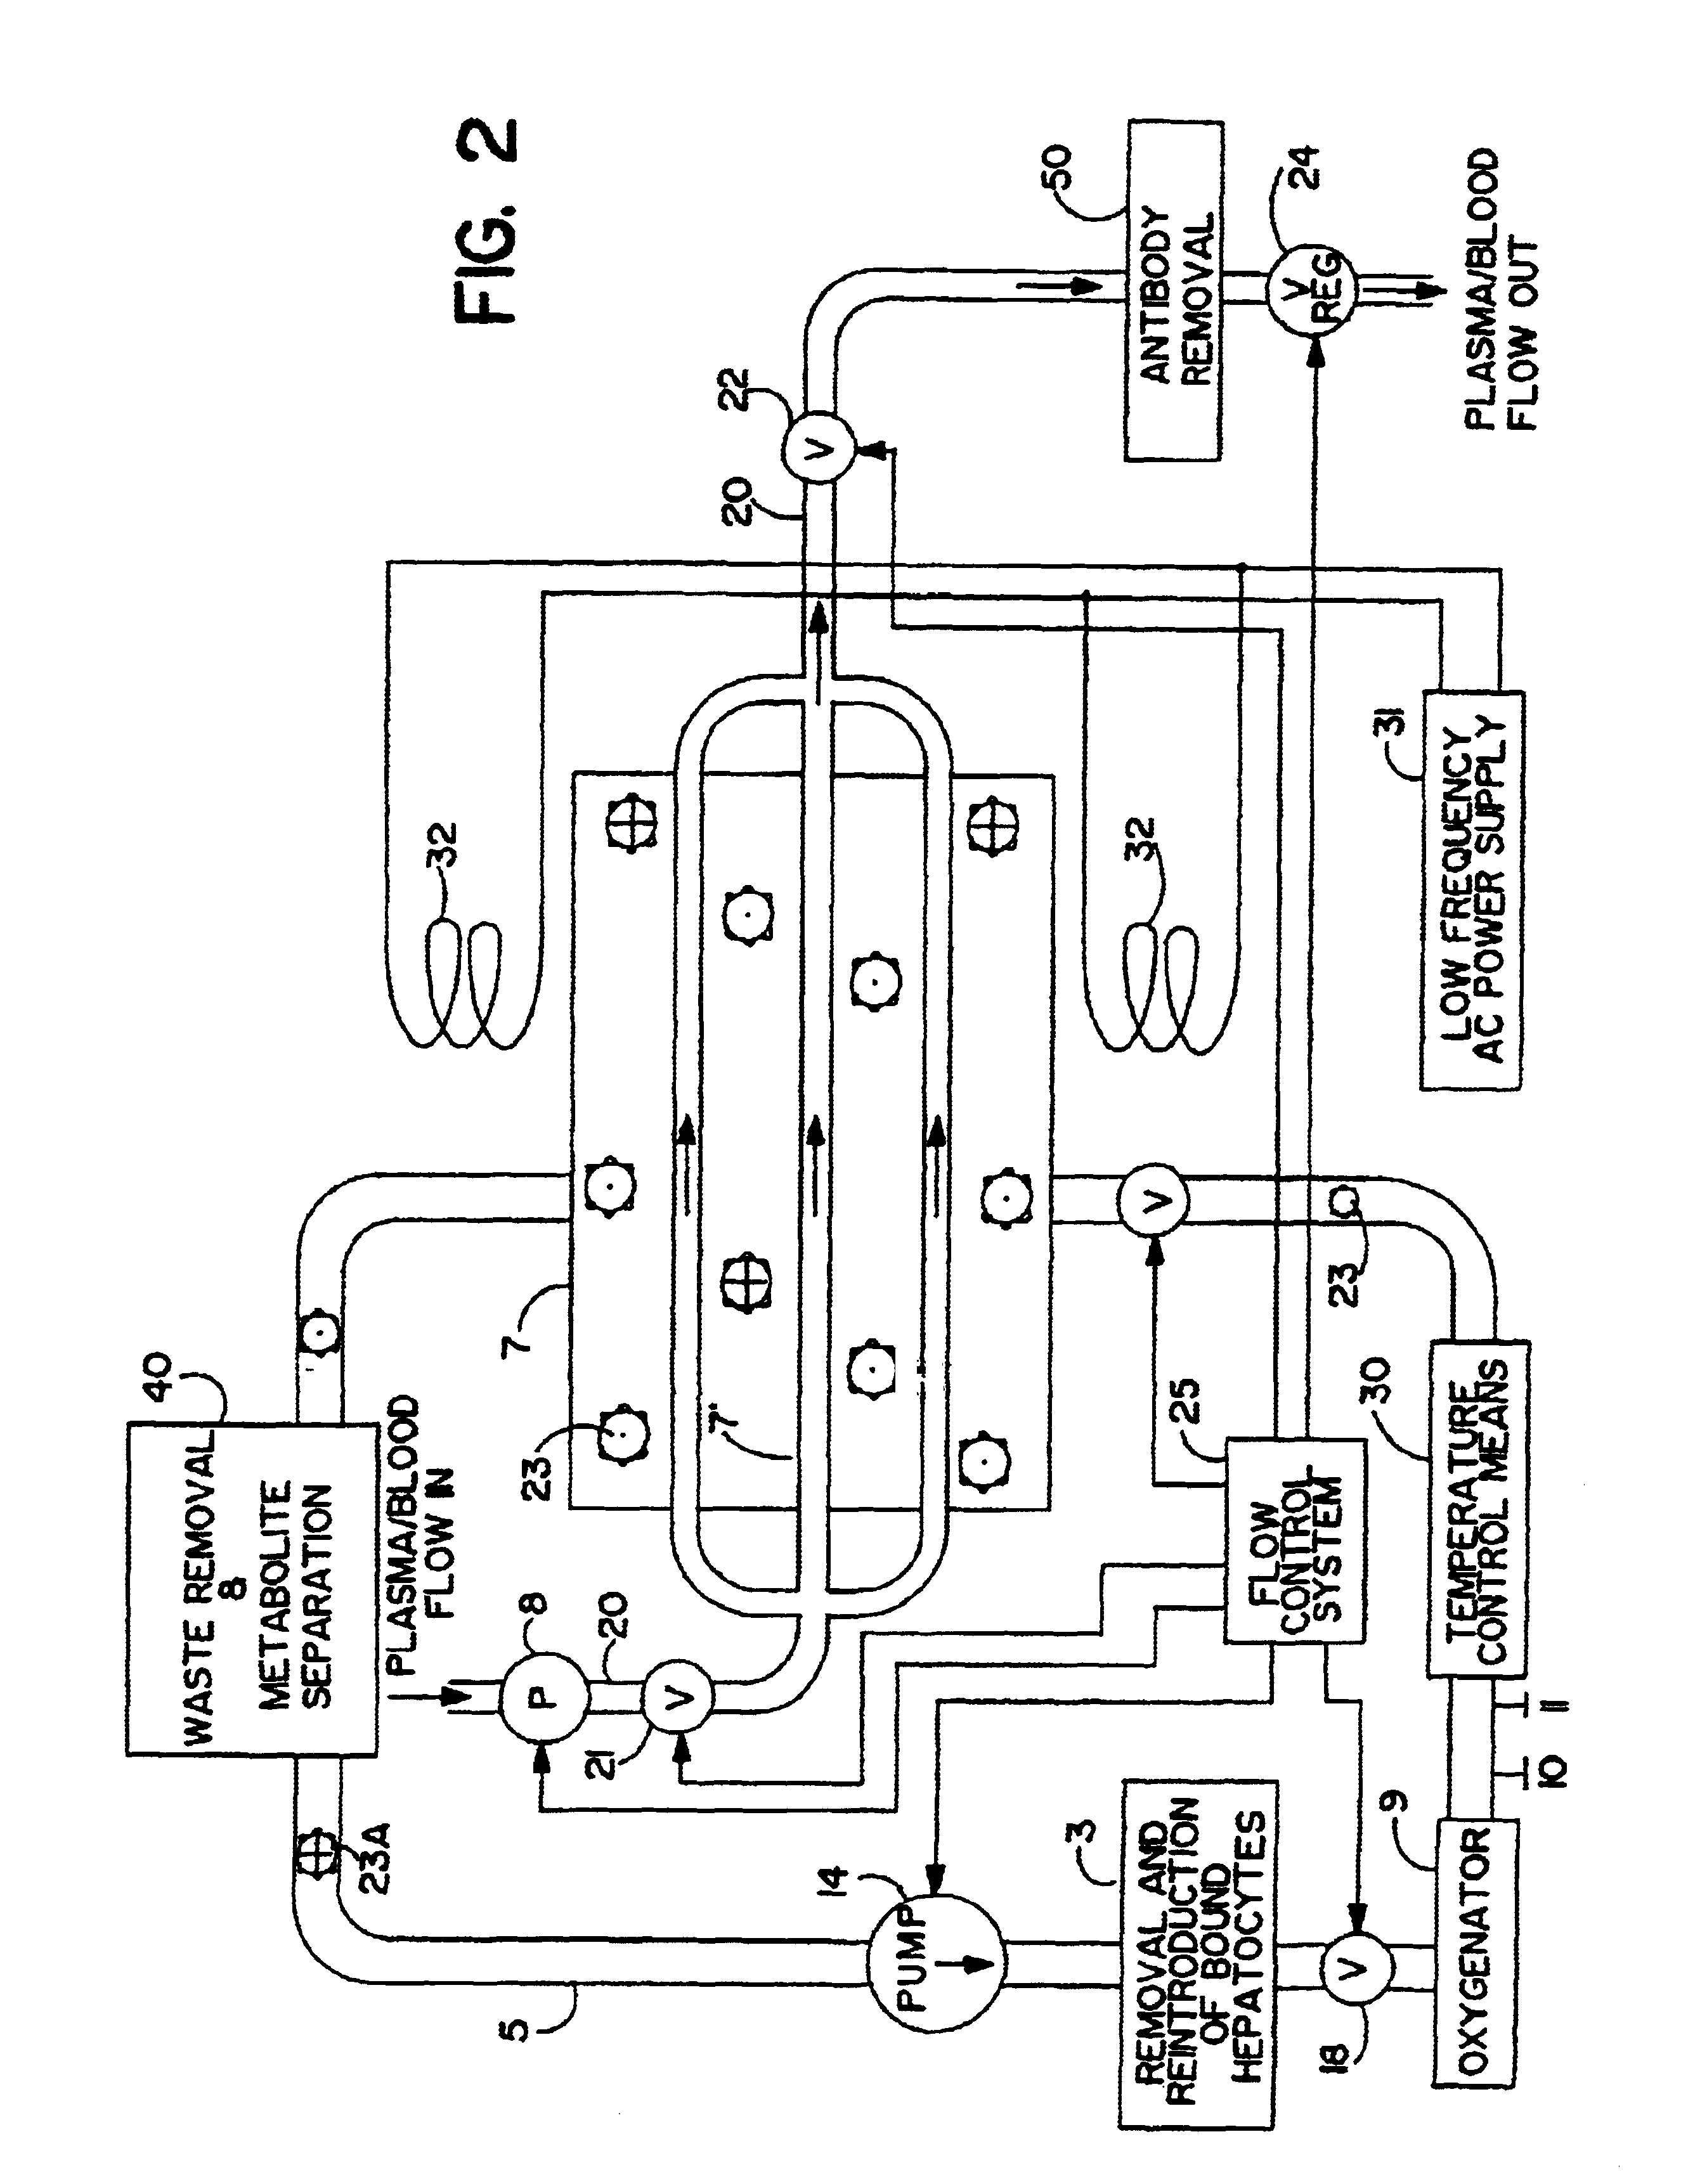 Artificial liver apparatus and method